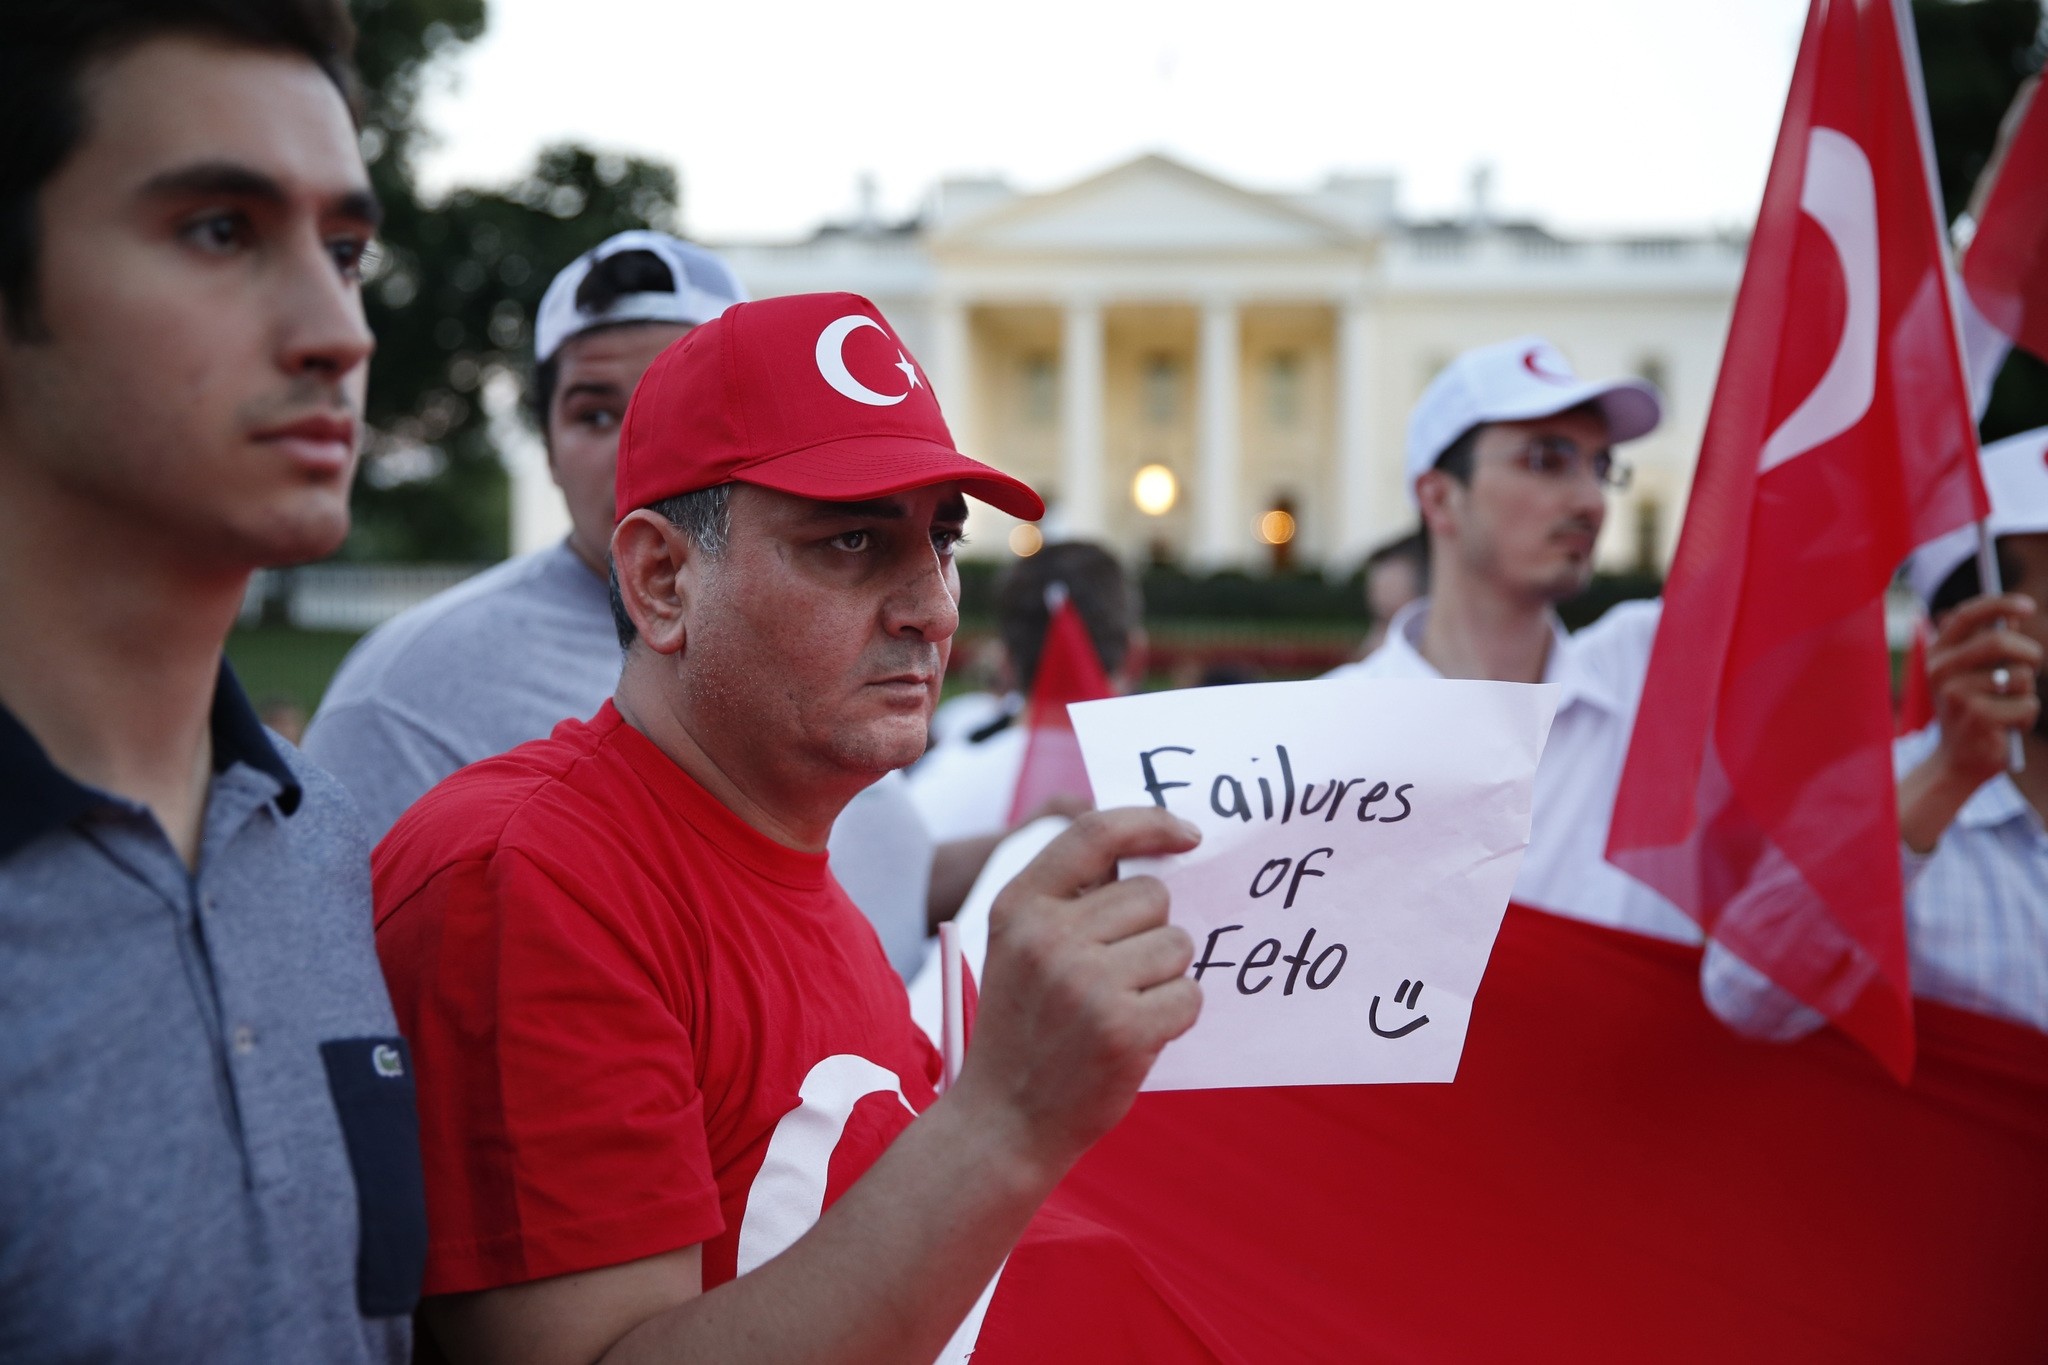 Demonstrators with Turkish flags at a demonstration against the failed attempted coup in Turkey, outside the Turkish embassy in Berlin, Germany, 16 July 2016.